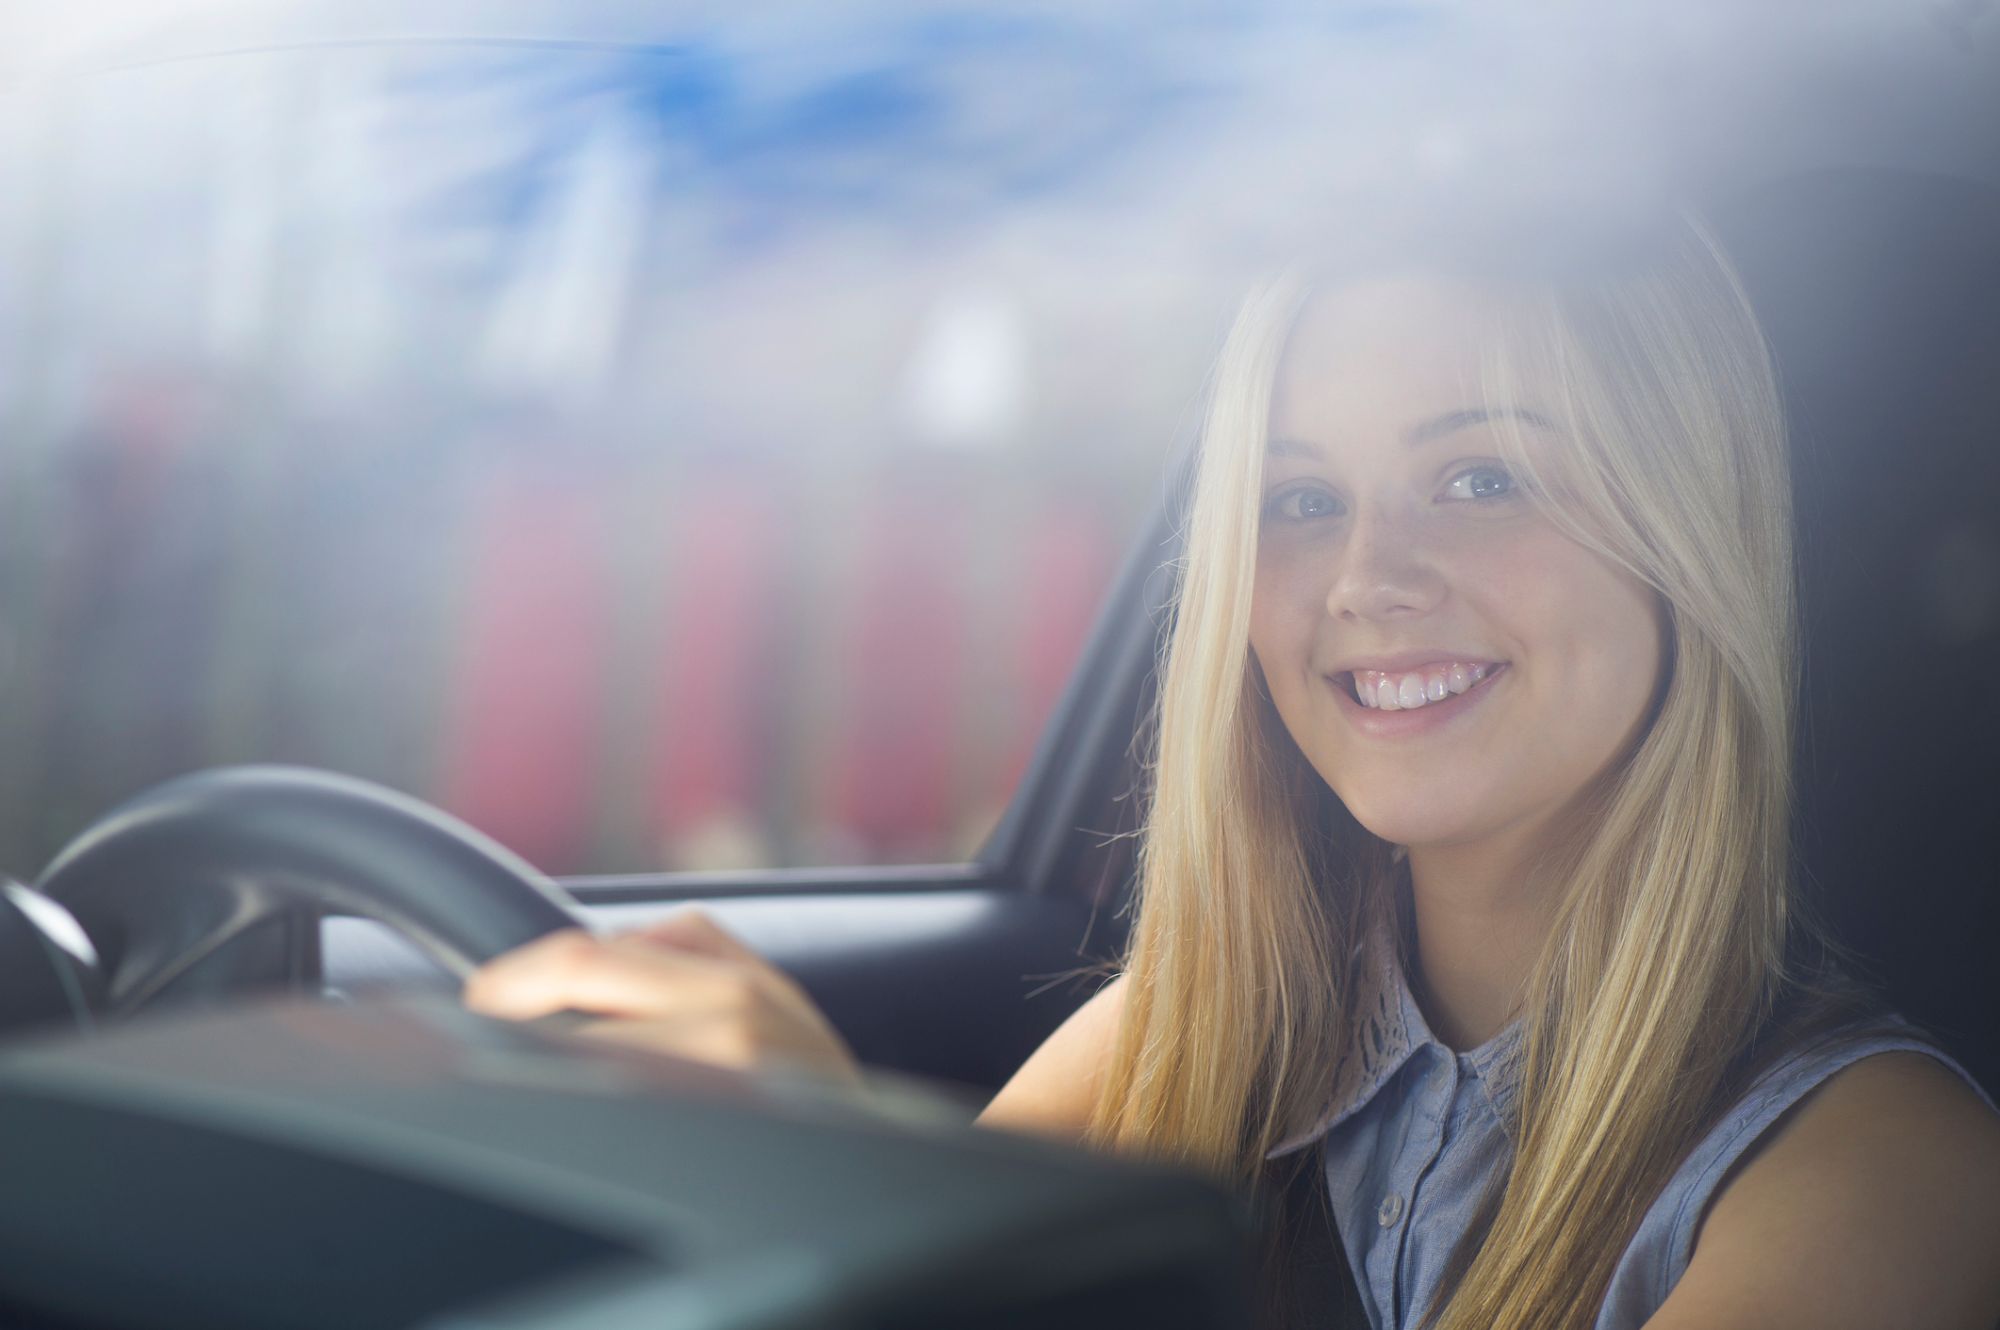 intensive driving courses telford. taking an intensive driving course in telford means that you can be ready to take your driving test in as little as 1 week